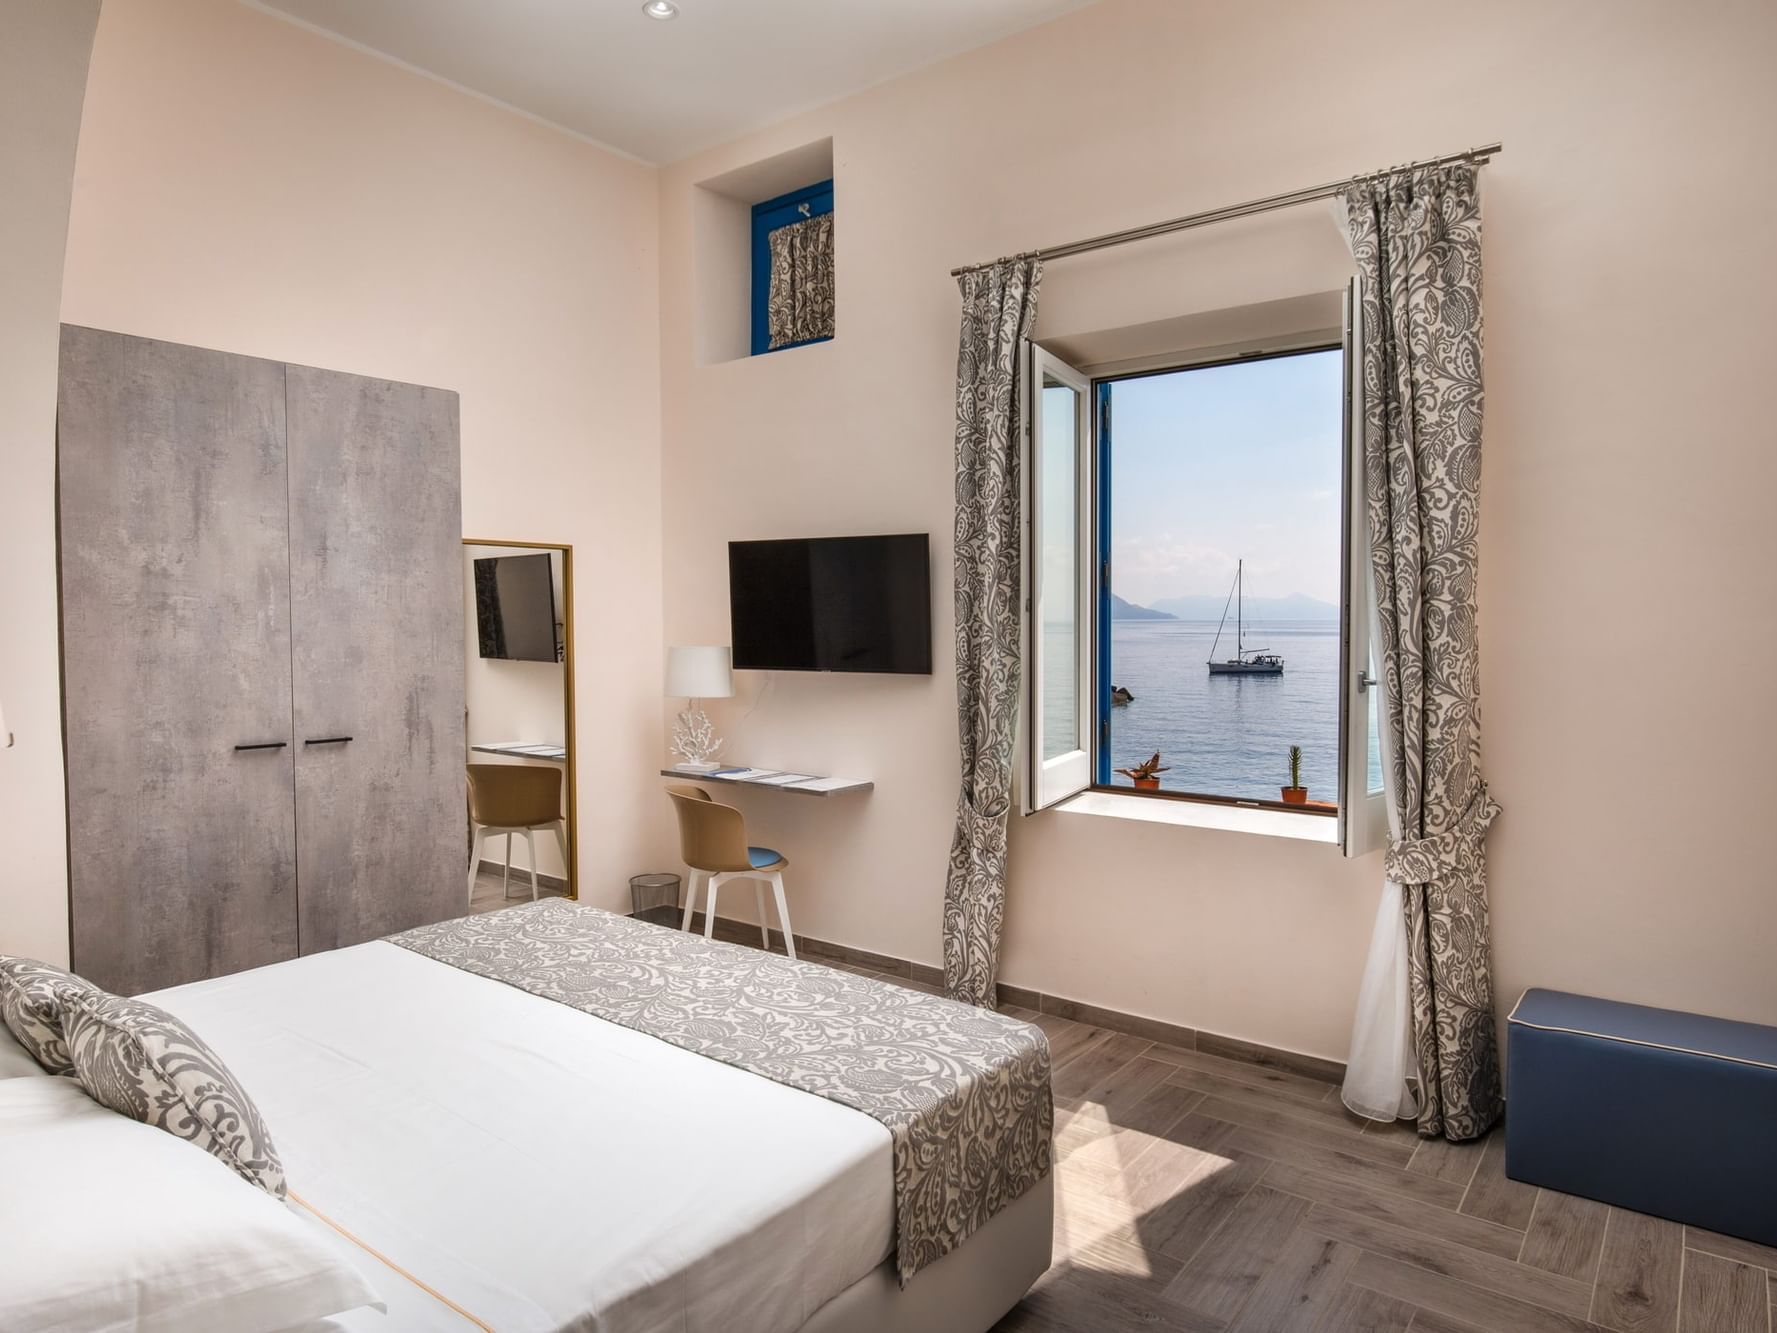 Hotel 4* sul mare - Eolie